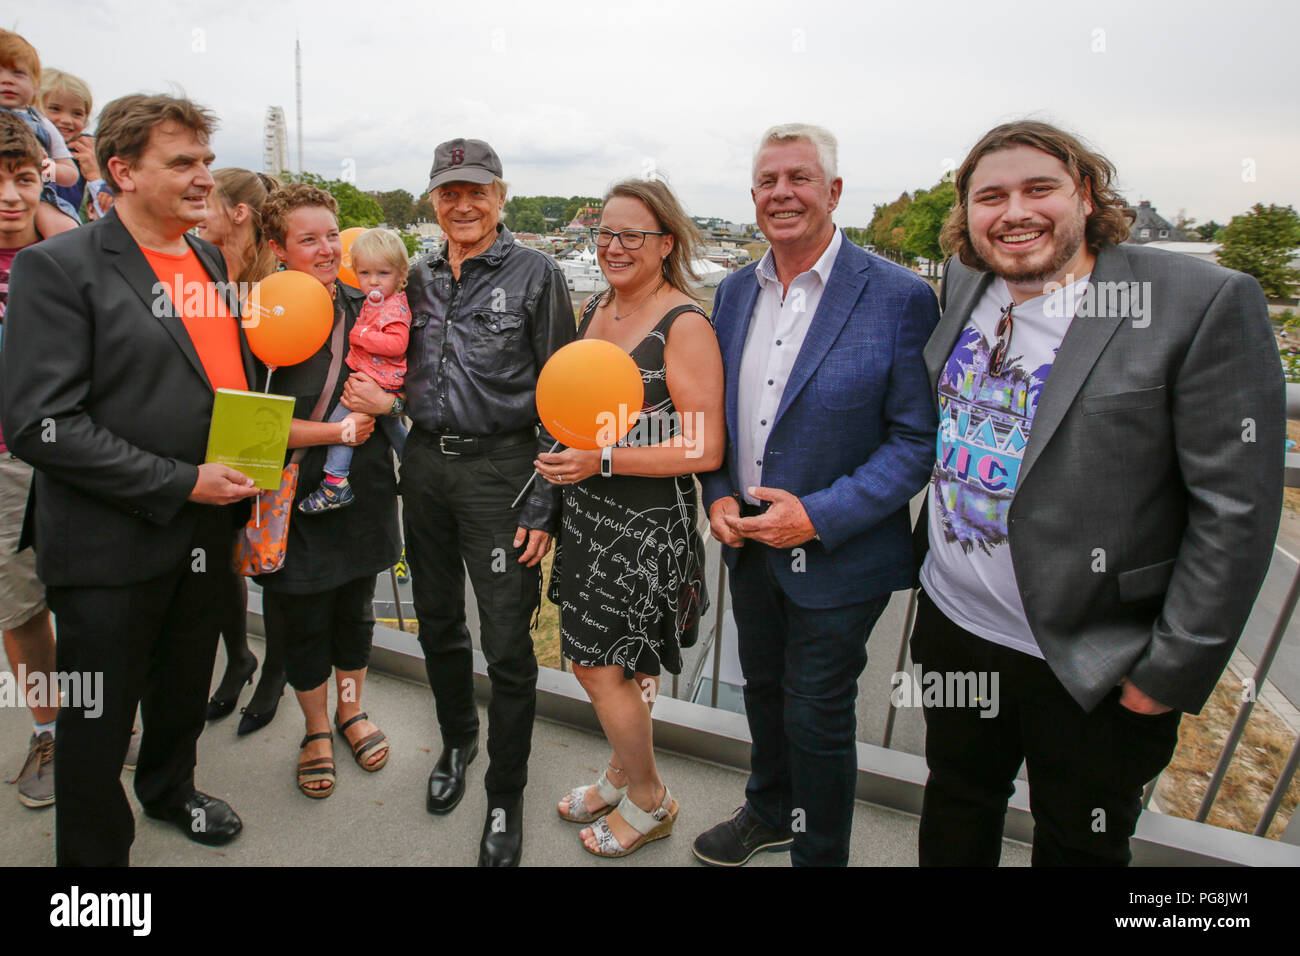 Worms, Germany. 24th August 2018. Actor Peter Englert (right), who initiated the renaming of the bridge to Terence-Hill-Bridge, Terence Hill (4th right) and the Lord Mayor of Worms Michael Kissel (2nd right) pose with members of the Karl-Kubel-Foundation for the press. Italian actor Terence Hill visited the German city of Worms, to present his new movie (My Name is somebody). Terence Hill added the stop in Worms to his movie promotion tour in Germany, to visit a pedestrian bridge, that is unofficially named Terence-Hill-Bridge (officially Karl-Kubel-Bridge). Stock Photo